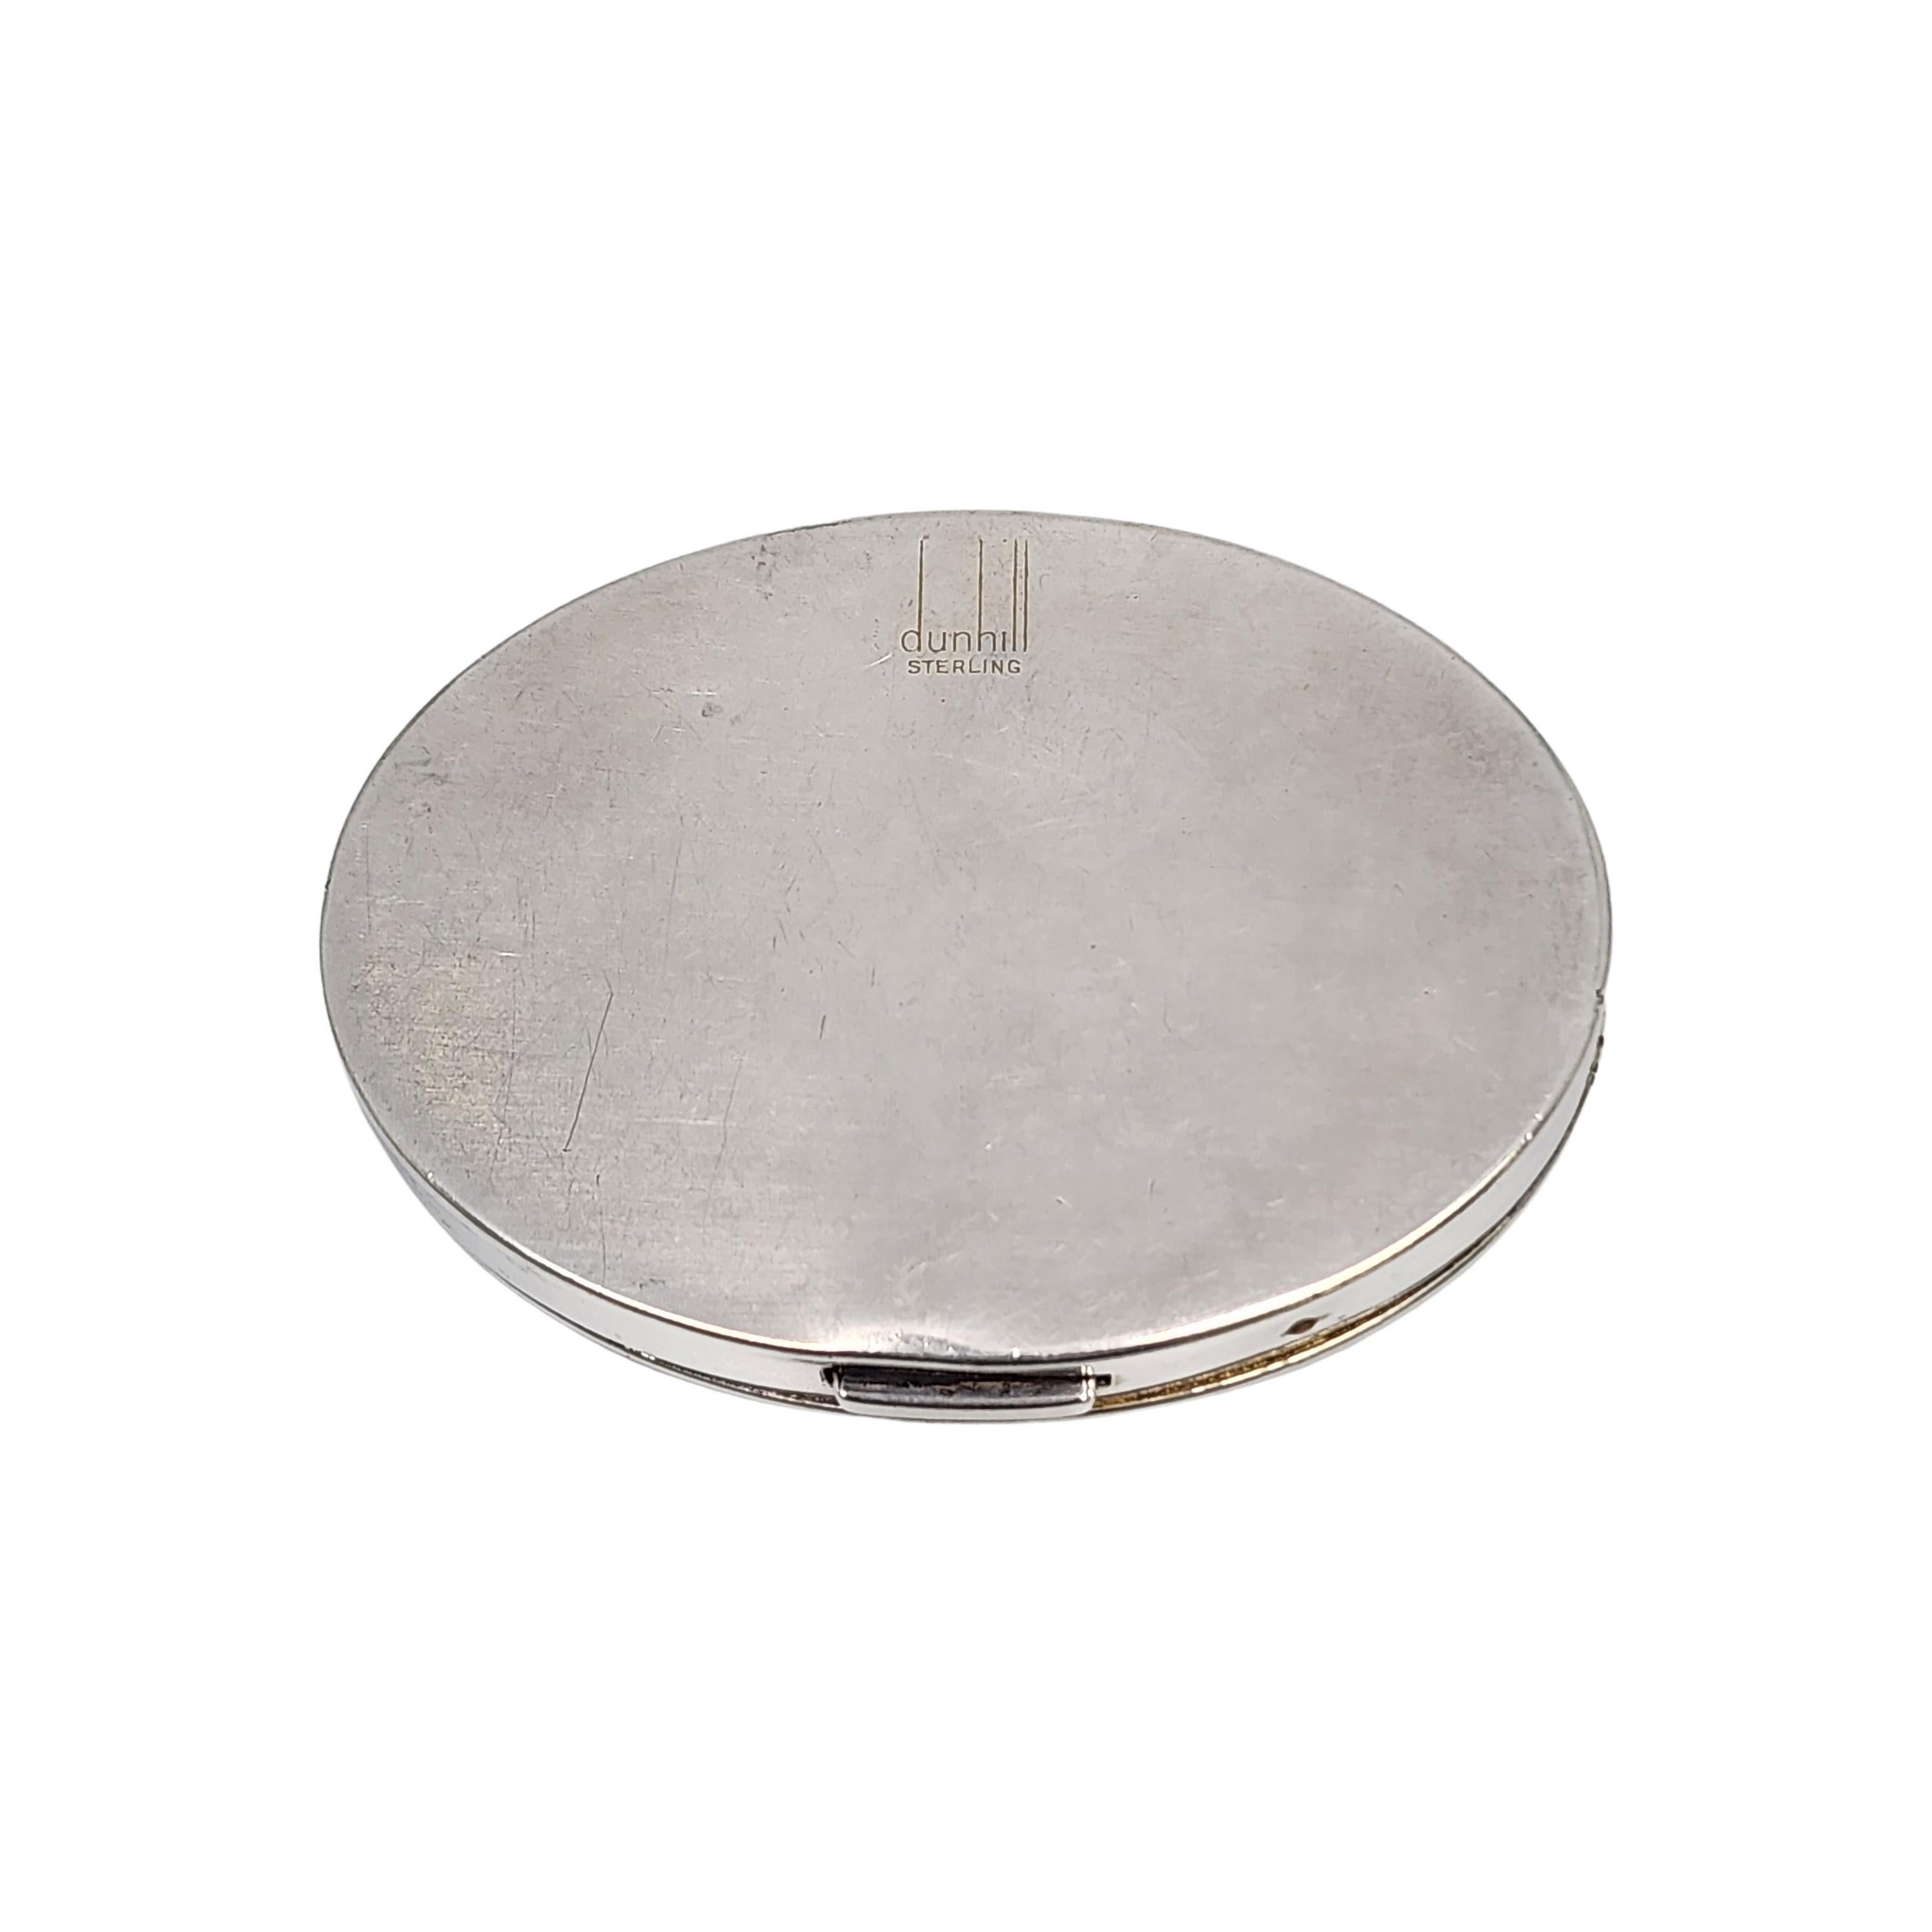 Dunhill Sterling Silver Oval Mirror Compact #16887 In Good Condition For Sale In Washington Depot, CT